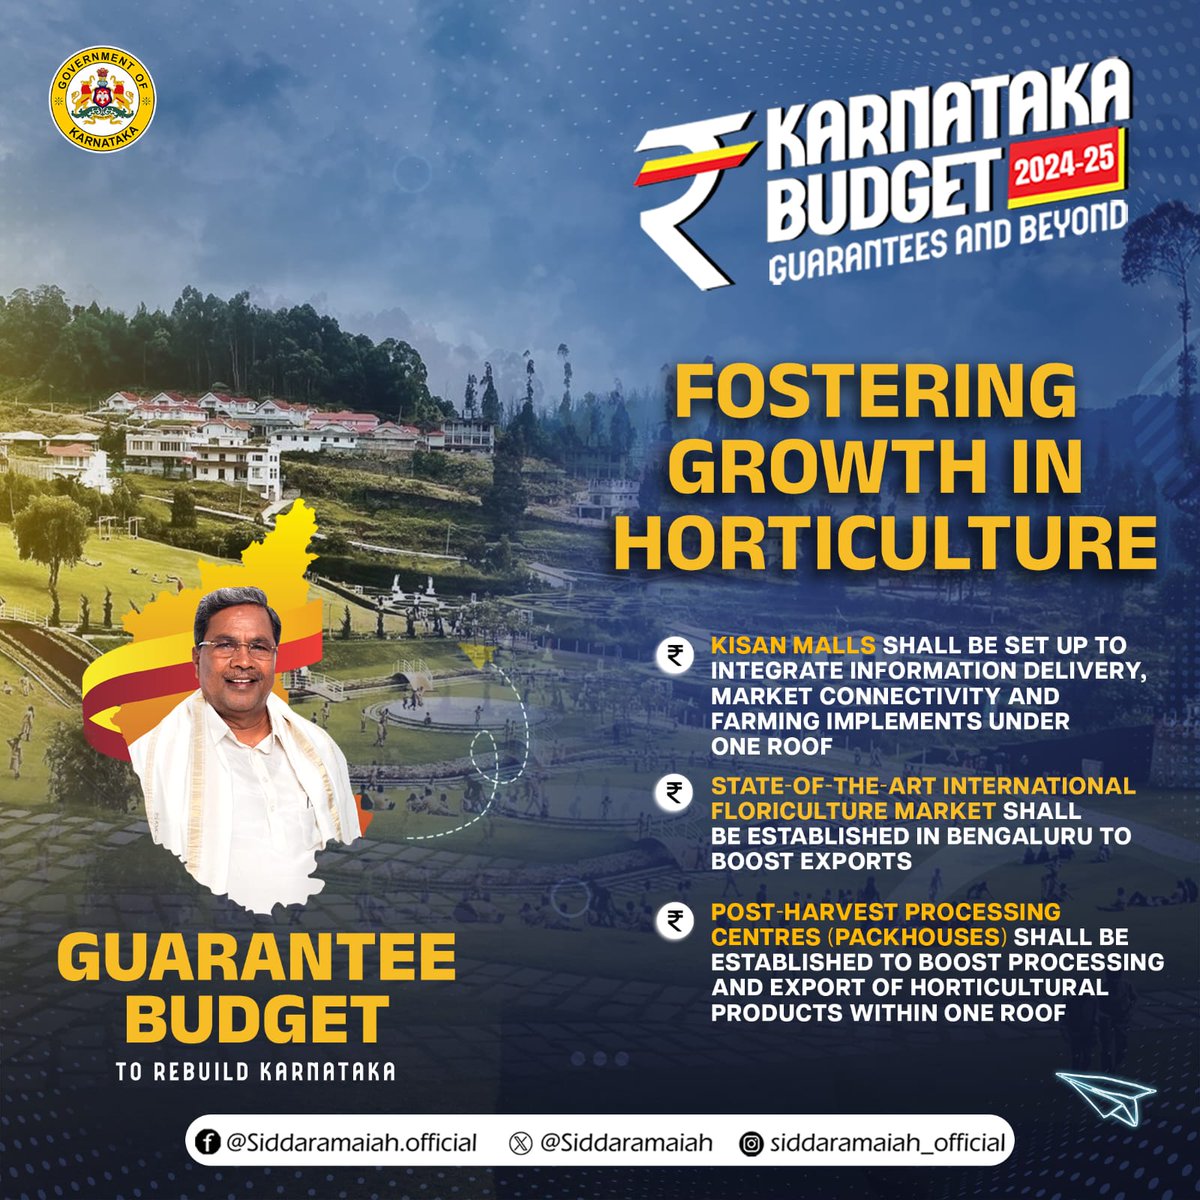 Unveiling transformative steps in Karnataka's Budget 2024-25 to revolutionise our horticulture landscape. Proud to introduce Kisan Malls for a seamless farming experience, a global floriculture market in Bengaluru for a blooming future, and advanced packhouses to enhance our